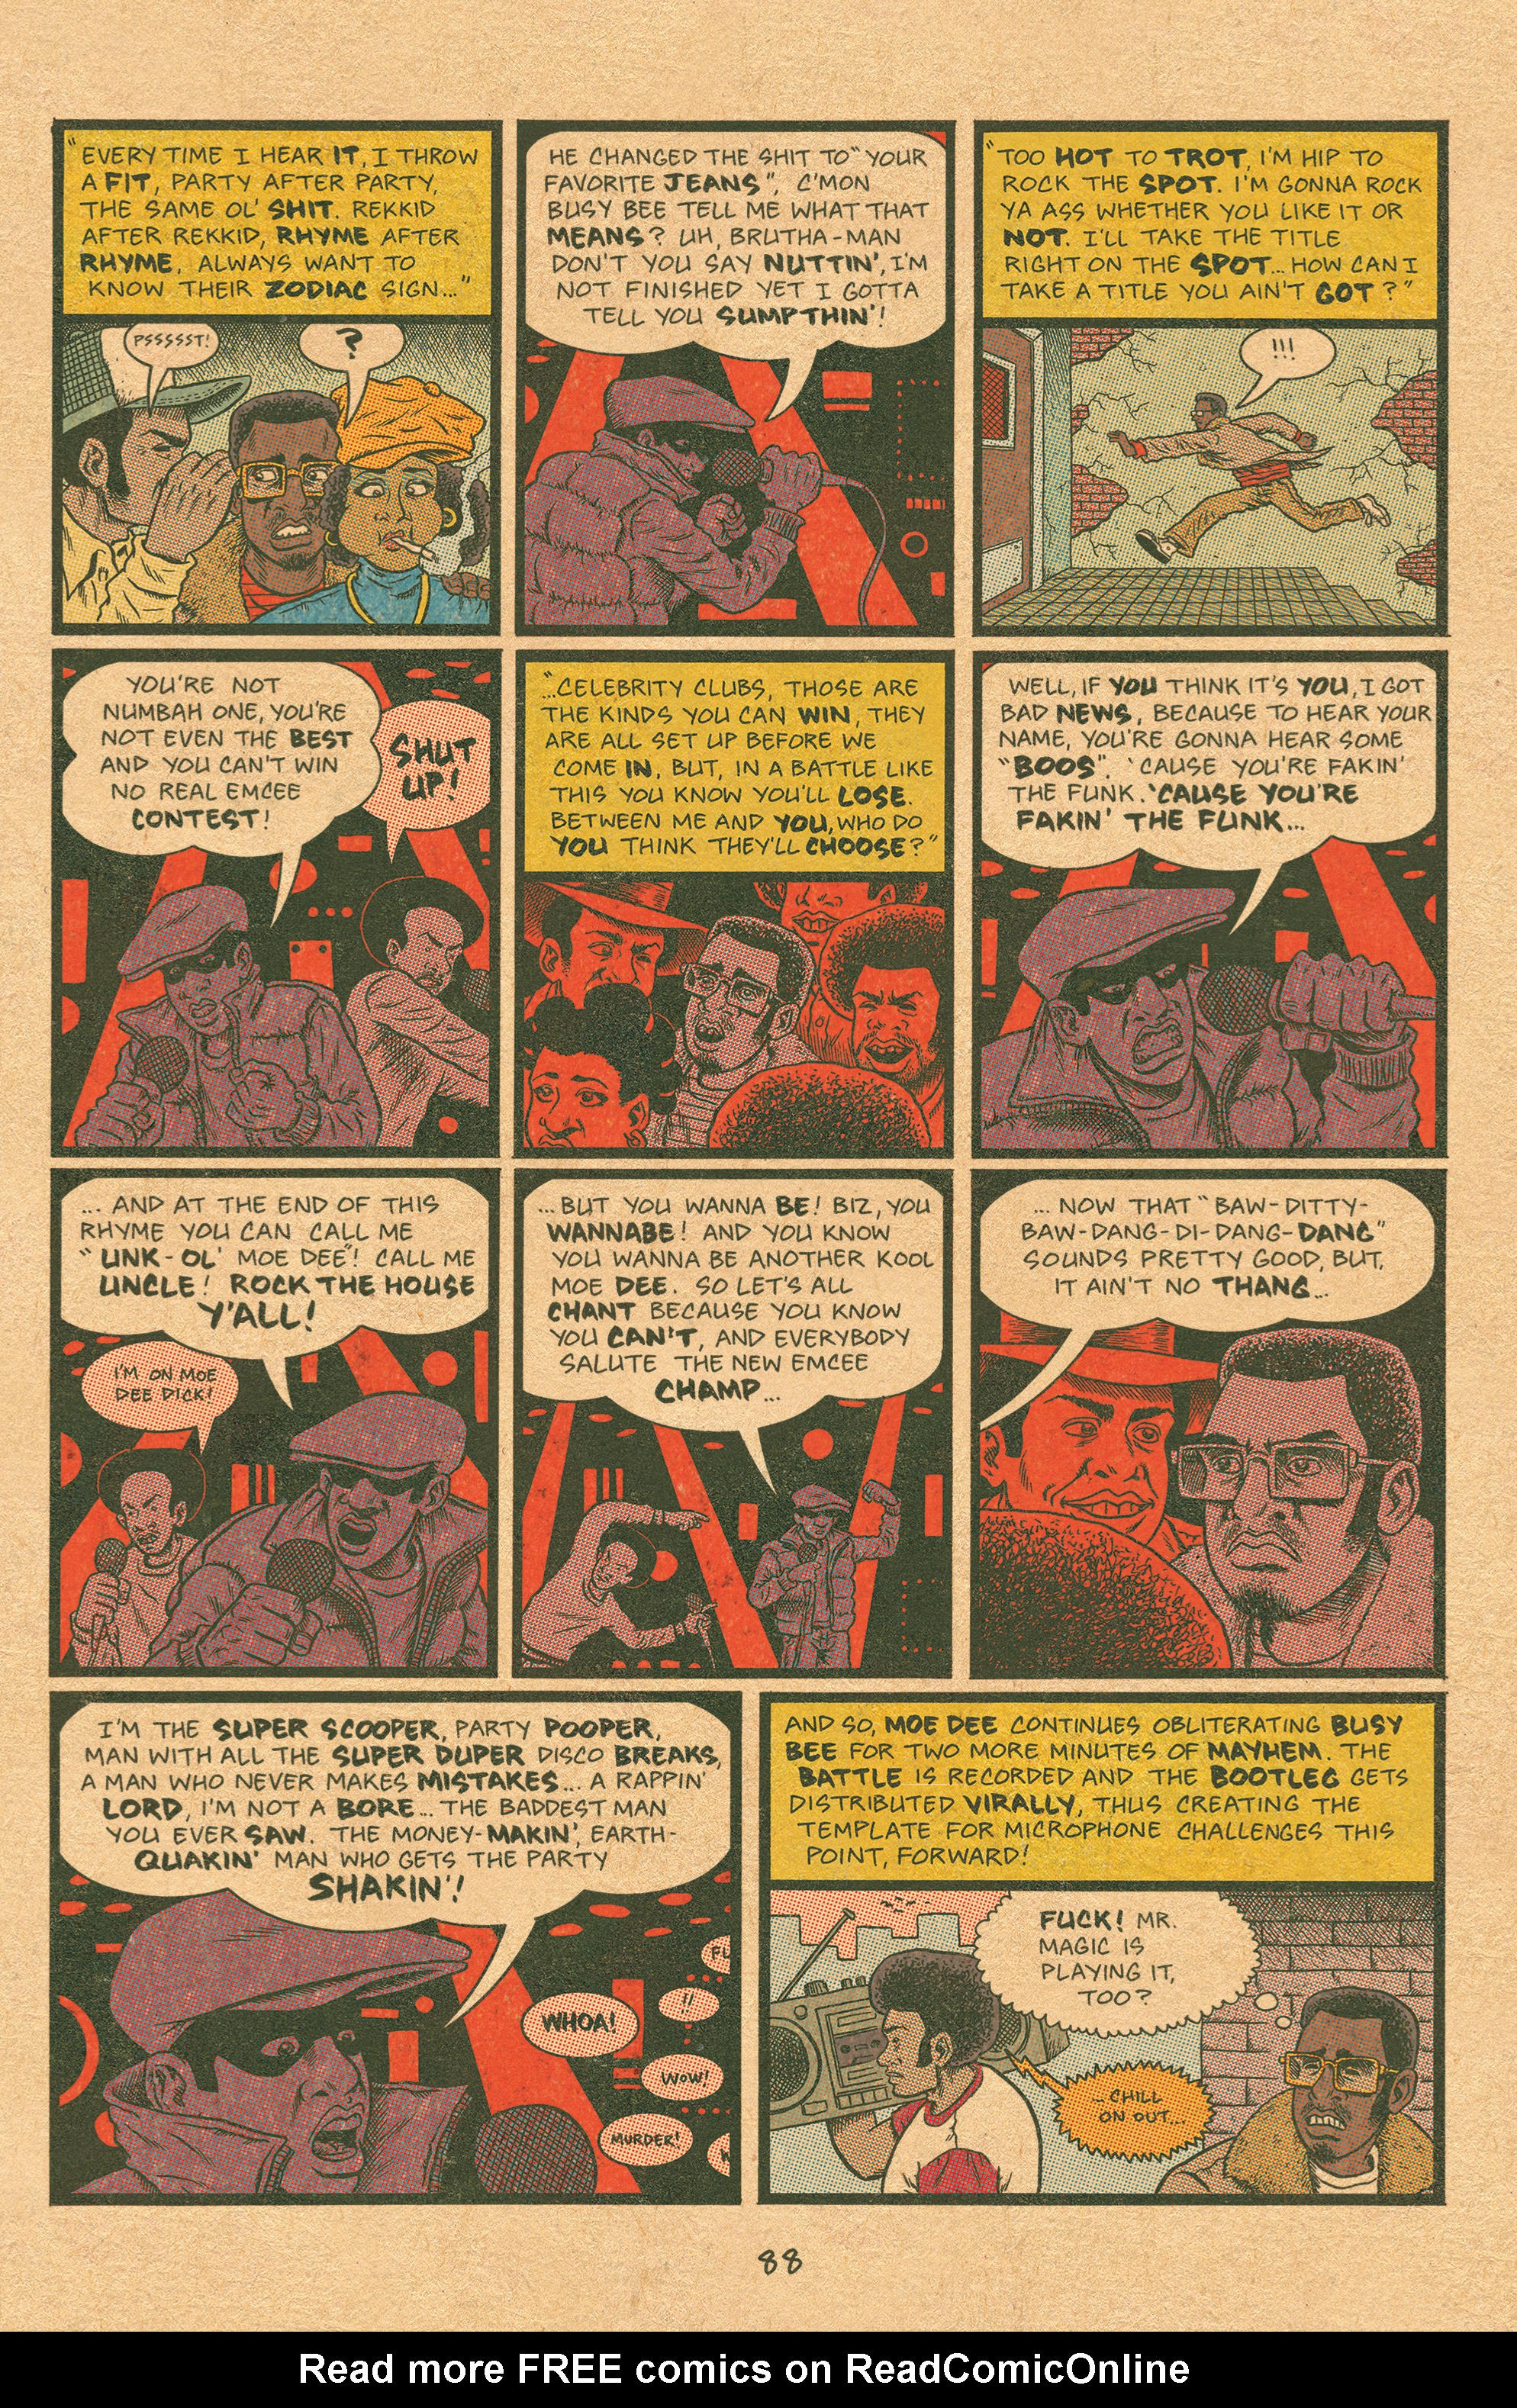 Read online Free Comic Book Day 2015 comic -  Issue # Hip Hop Family Tree Three-in-One - Featuring Cosplayers - 8